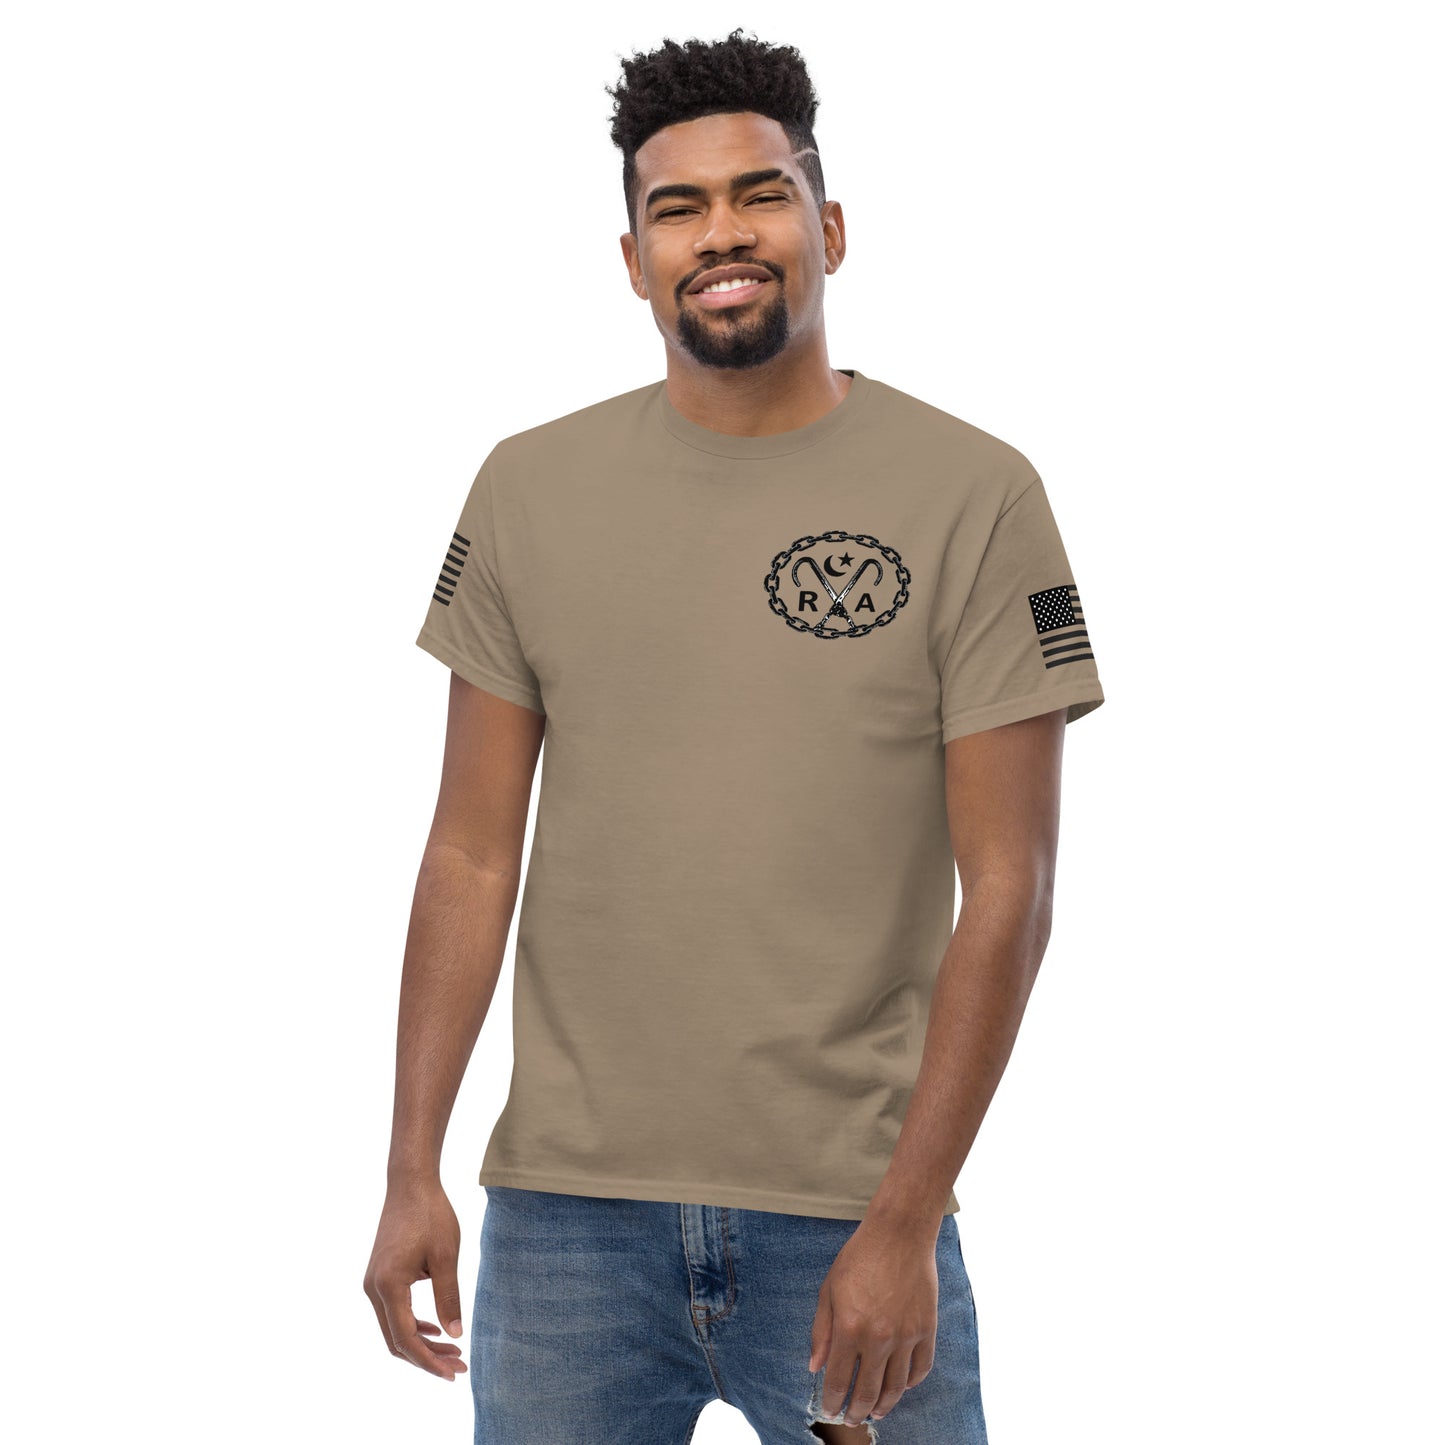 Hook and Chain - Black Ink Men's classic tee